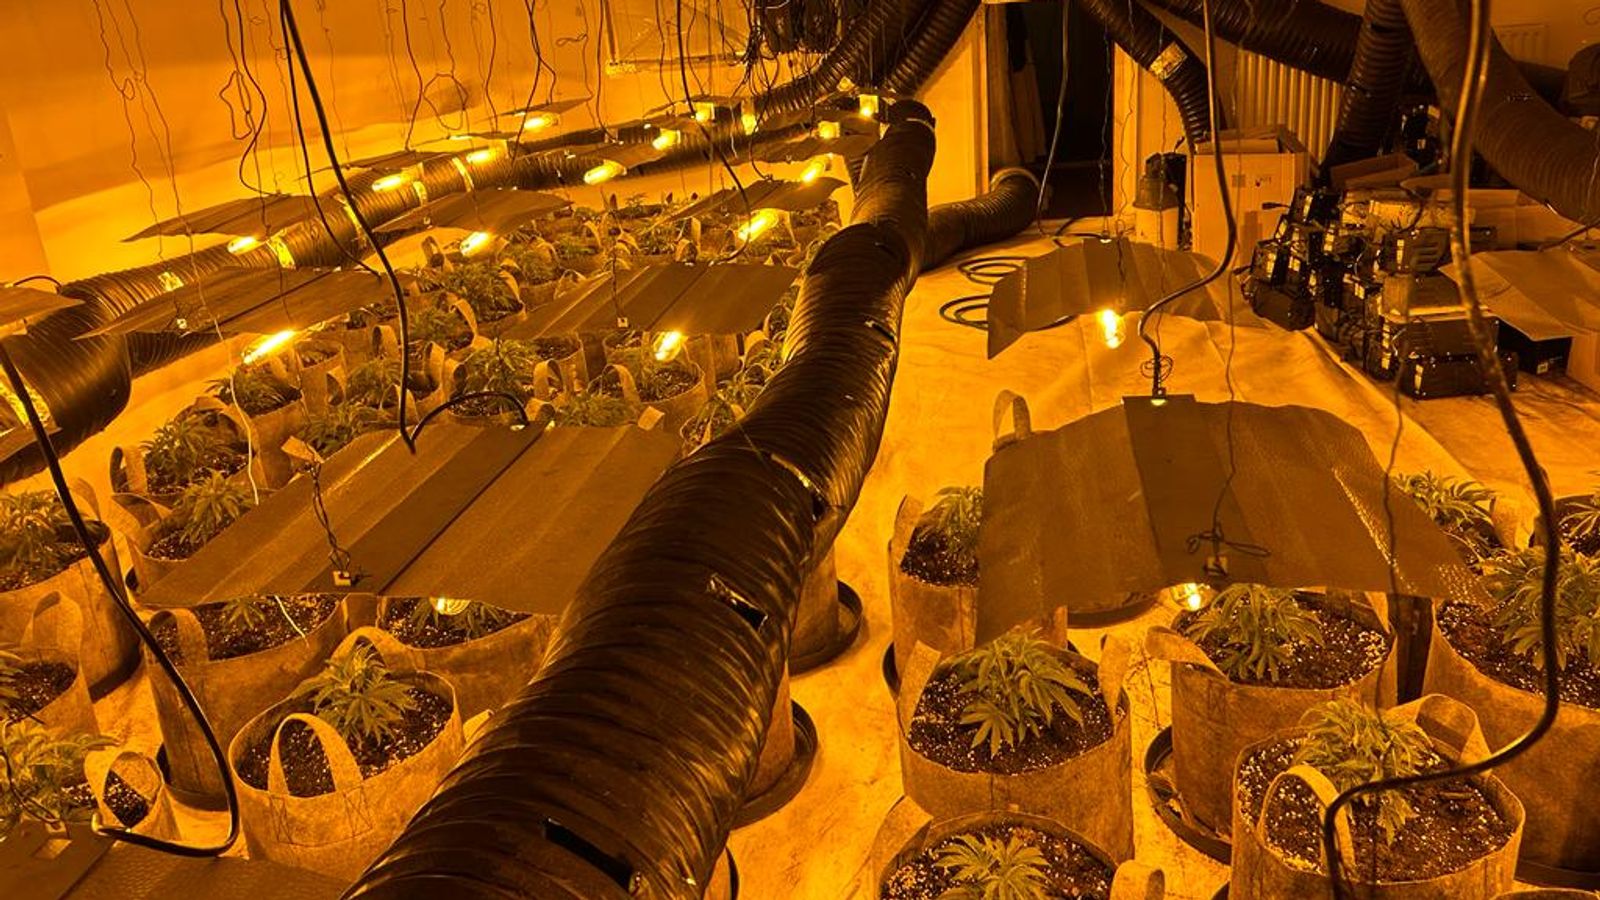 Operation Mille: £130m worth of cannabis, £636,000 of cash and 20 guns seized in UK-wide crackdown